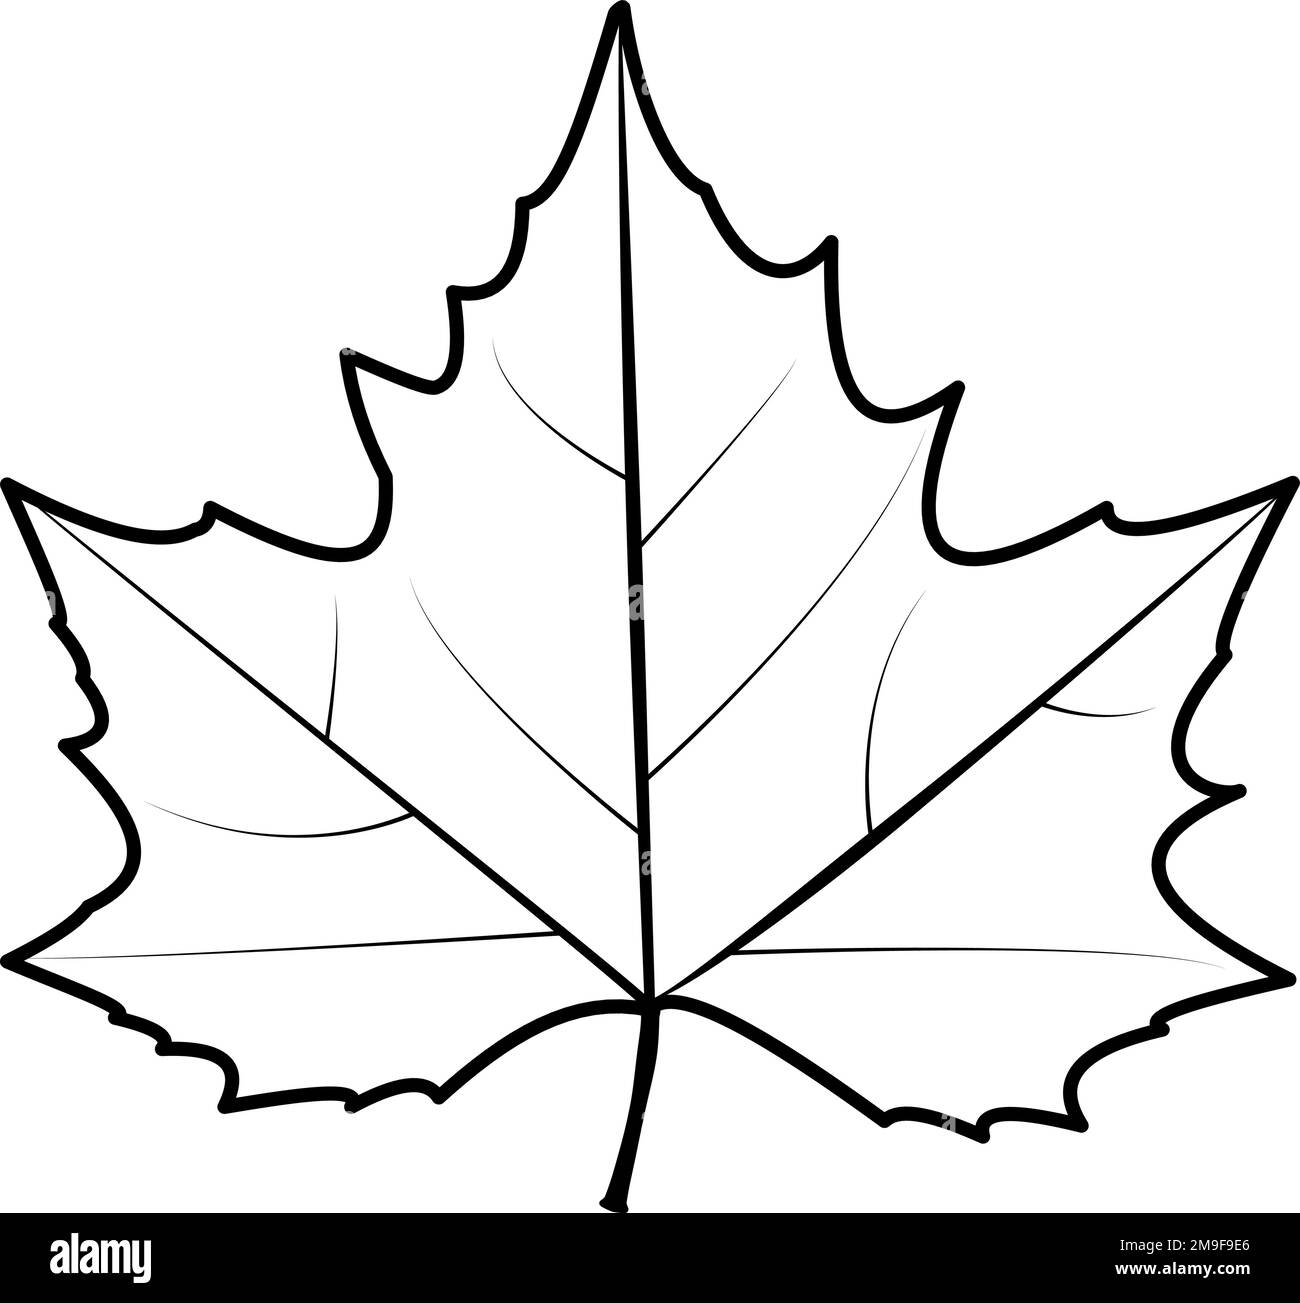 How to Draw a Grape Leaf Step by Step - EasyLineDrawing